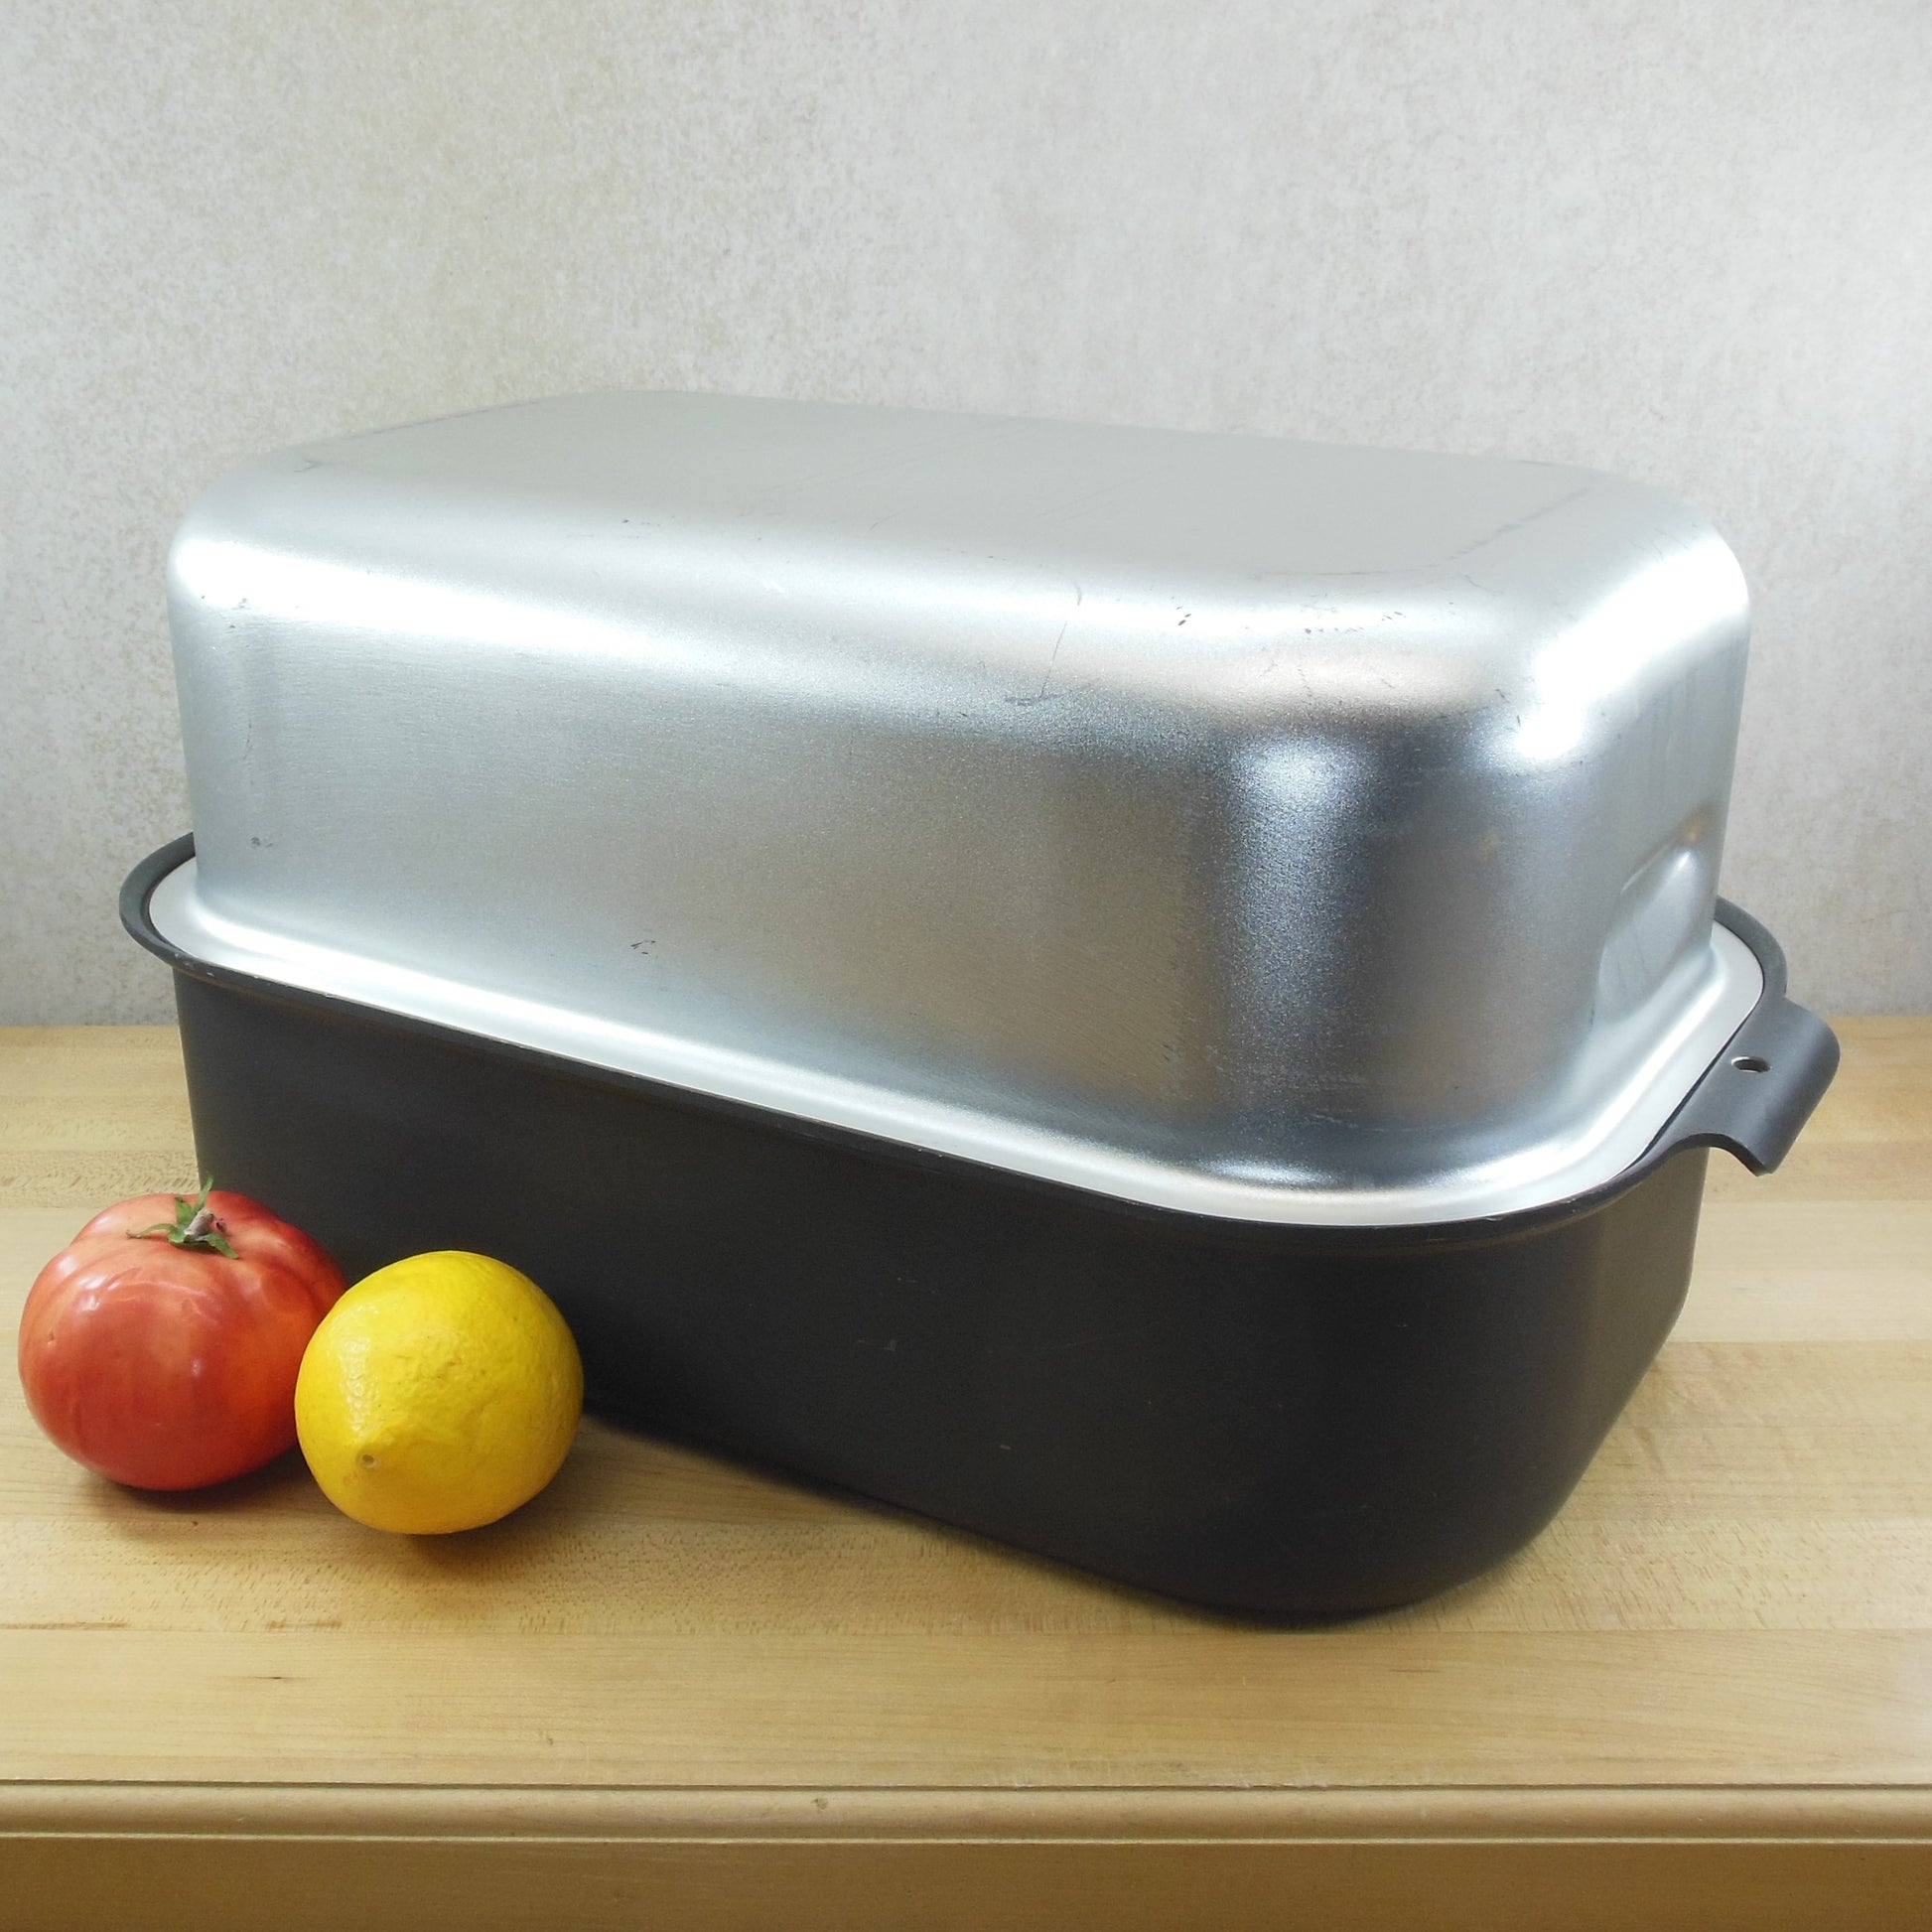 West Bend Miracle Maid Dome Lid Turkey Roaster Pan - Anodized